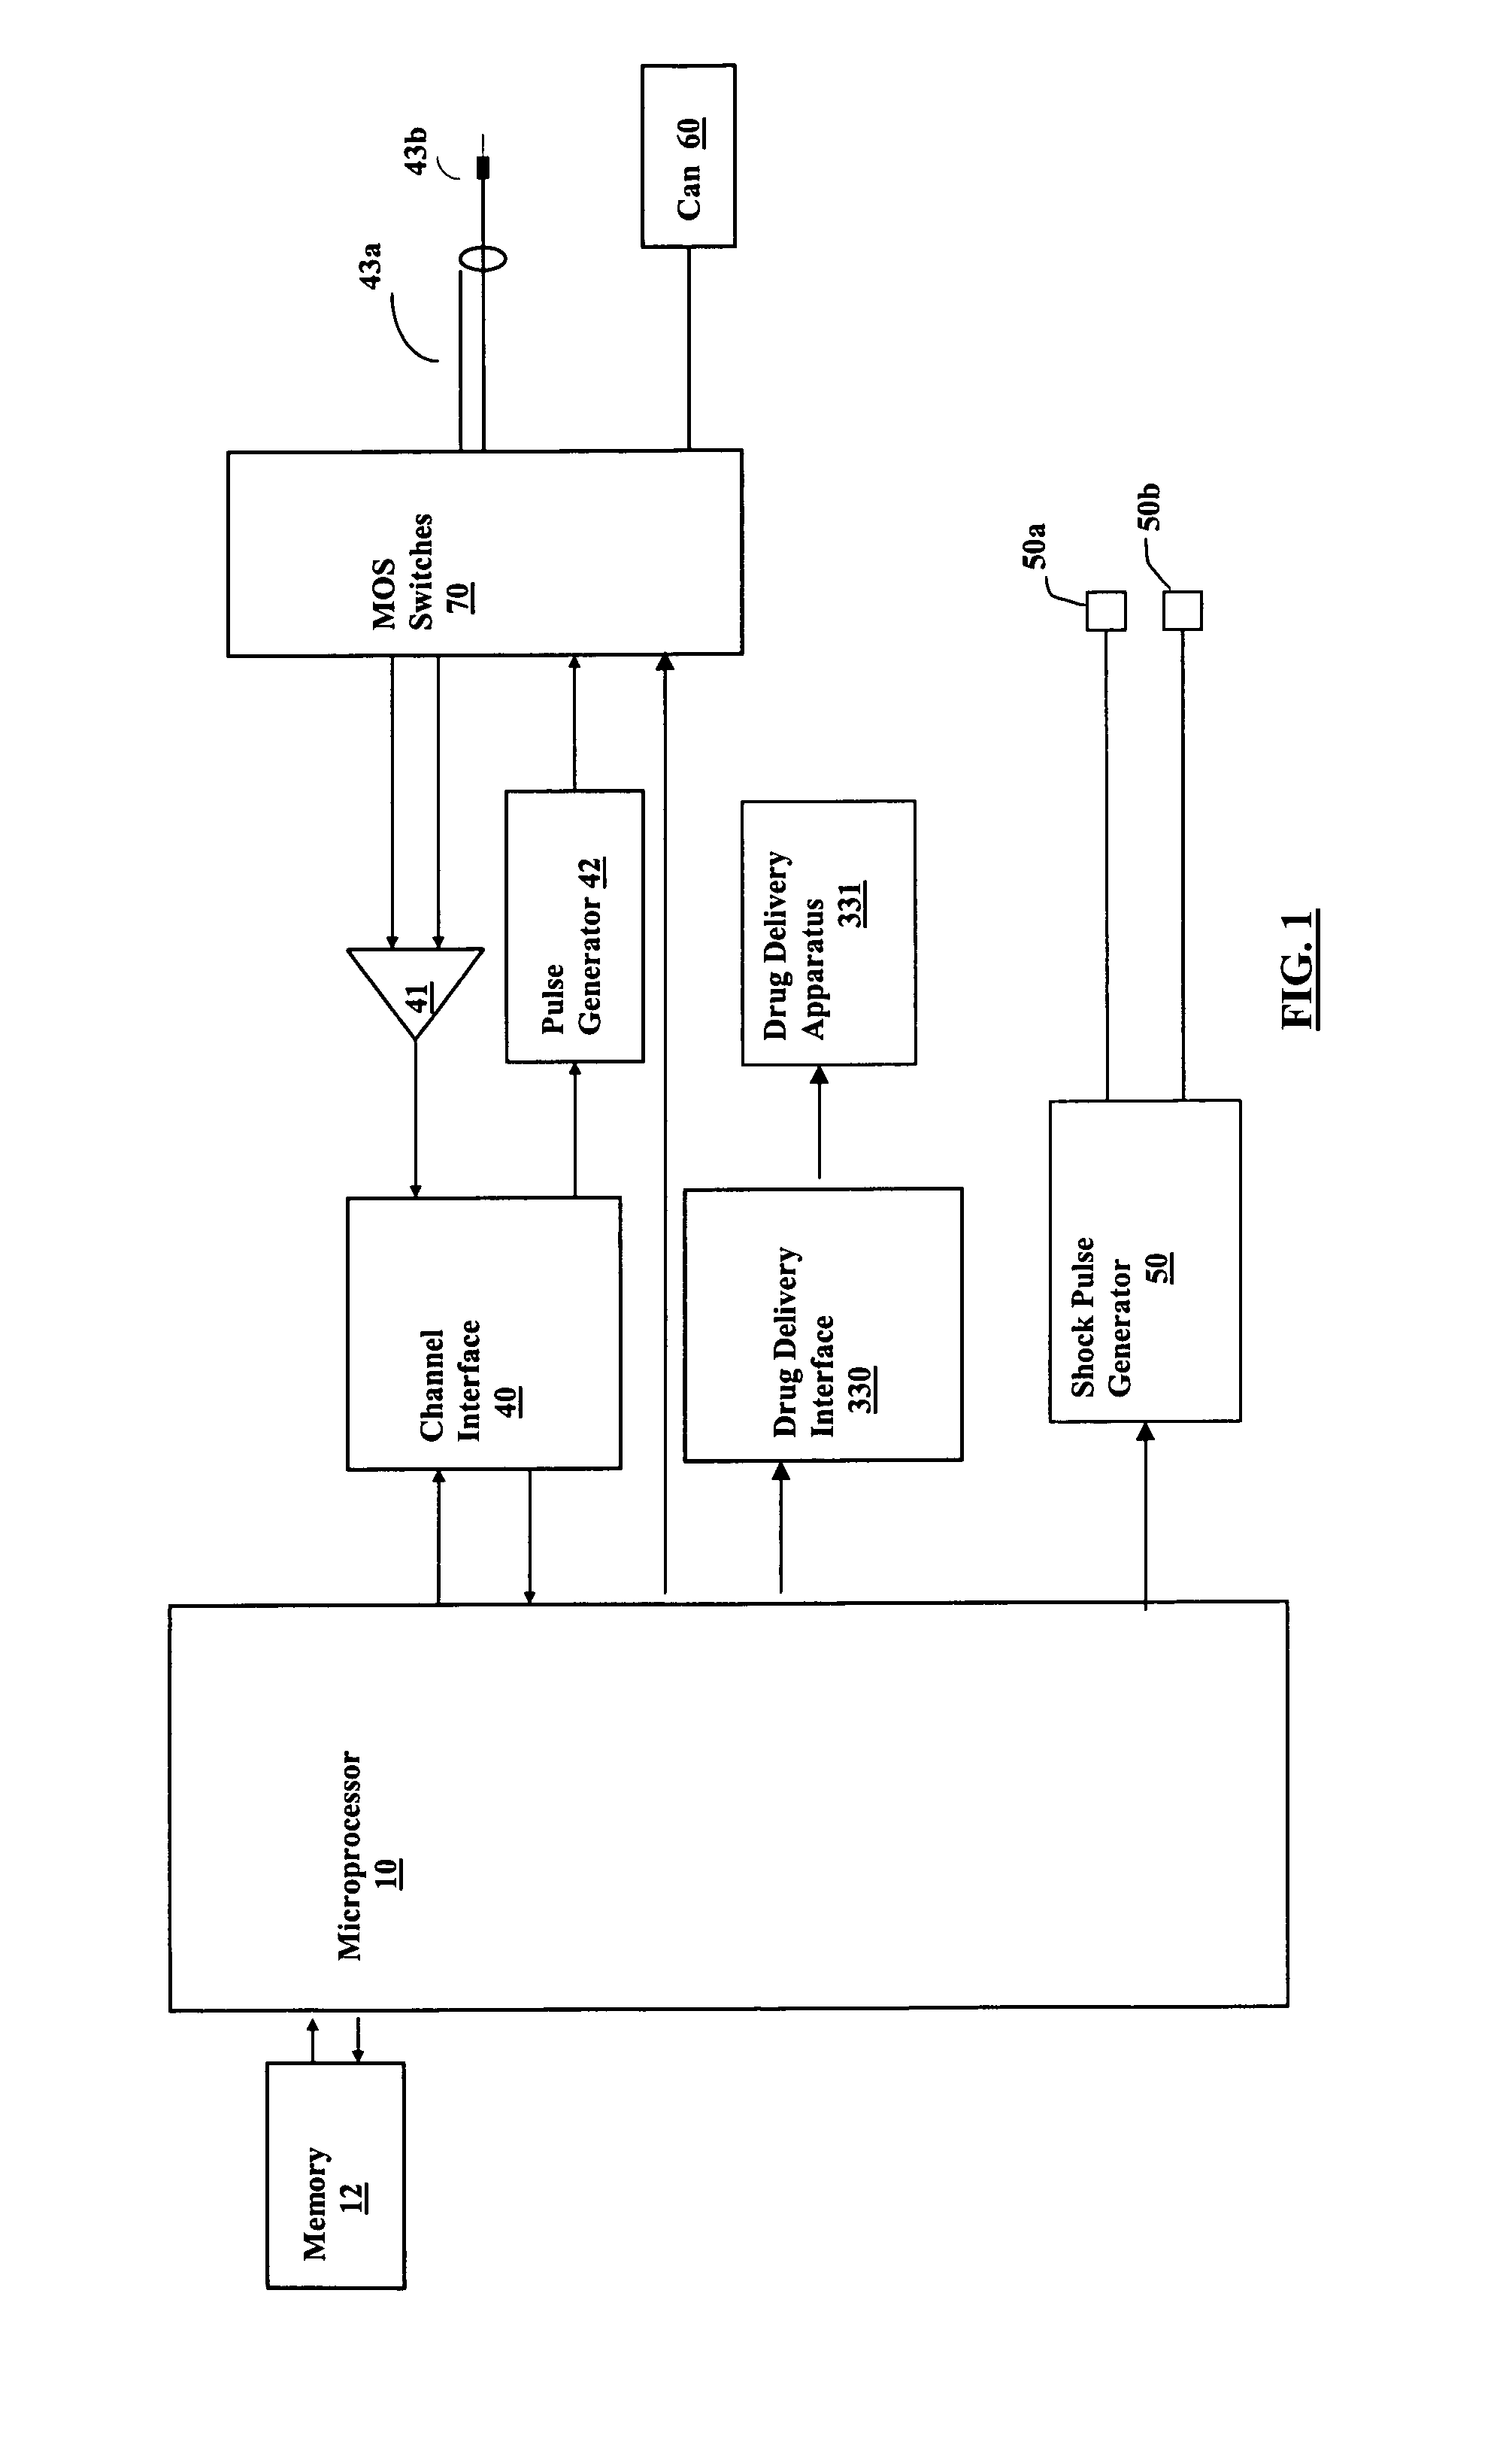 Method and apparatus for delivering pre-shock defibrillation therapy